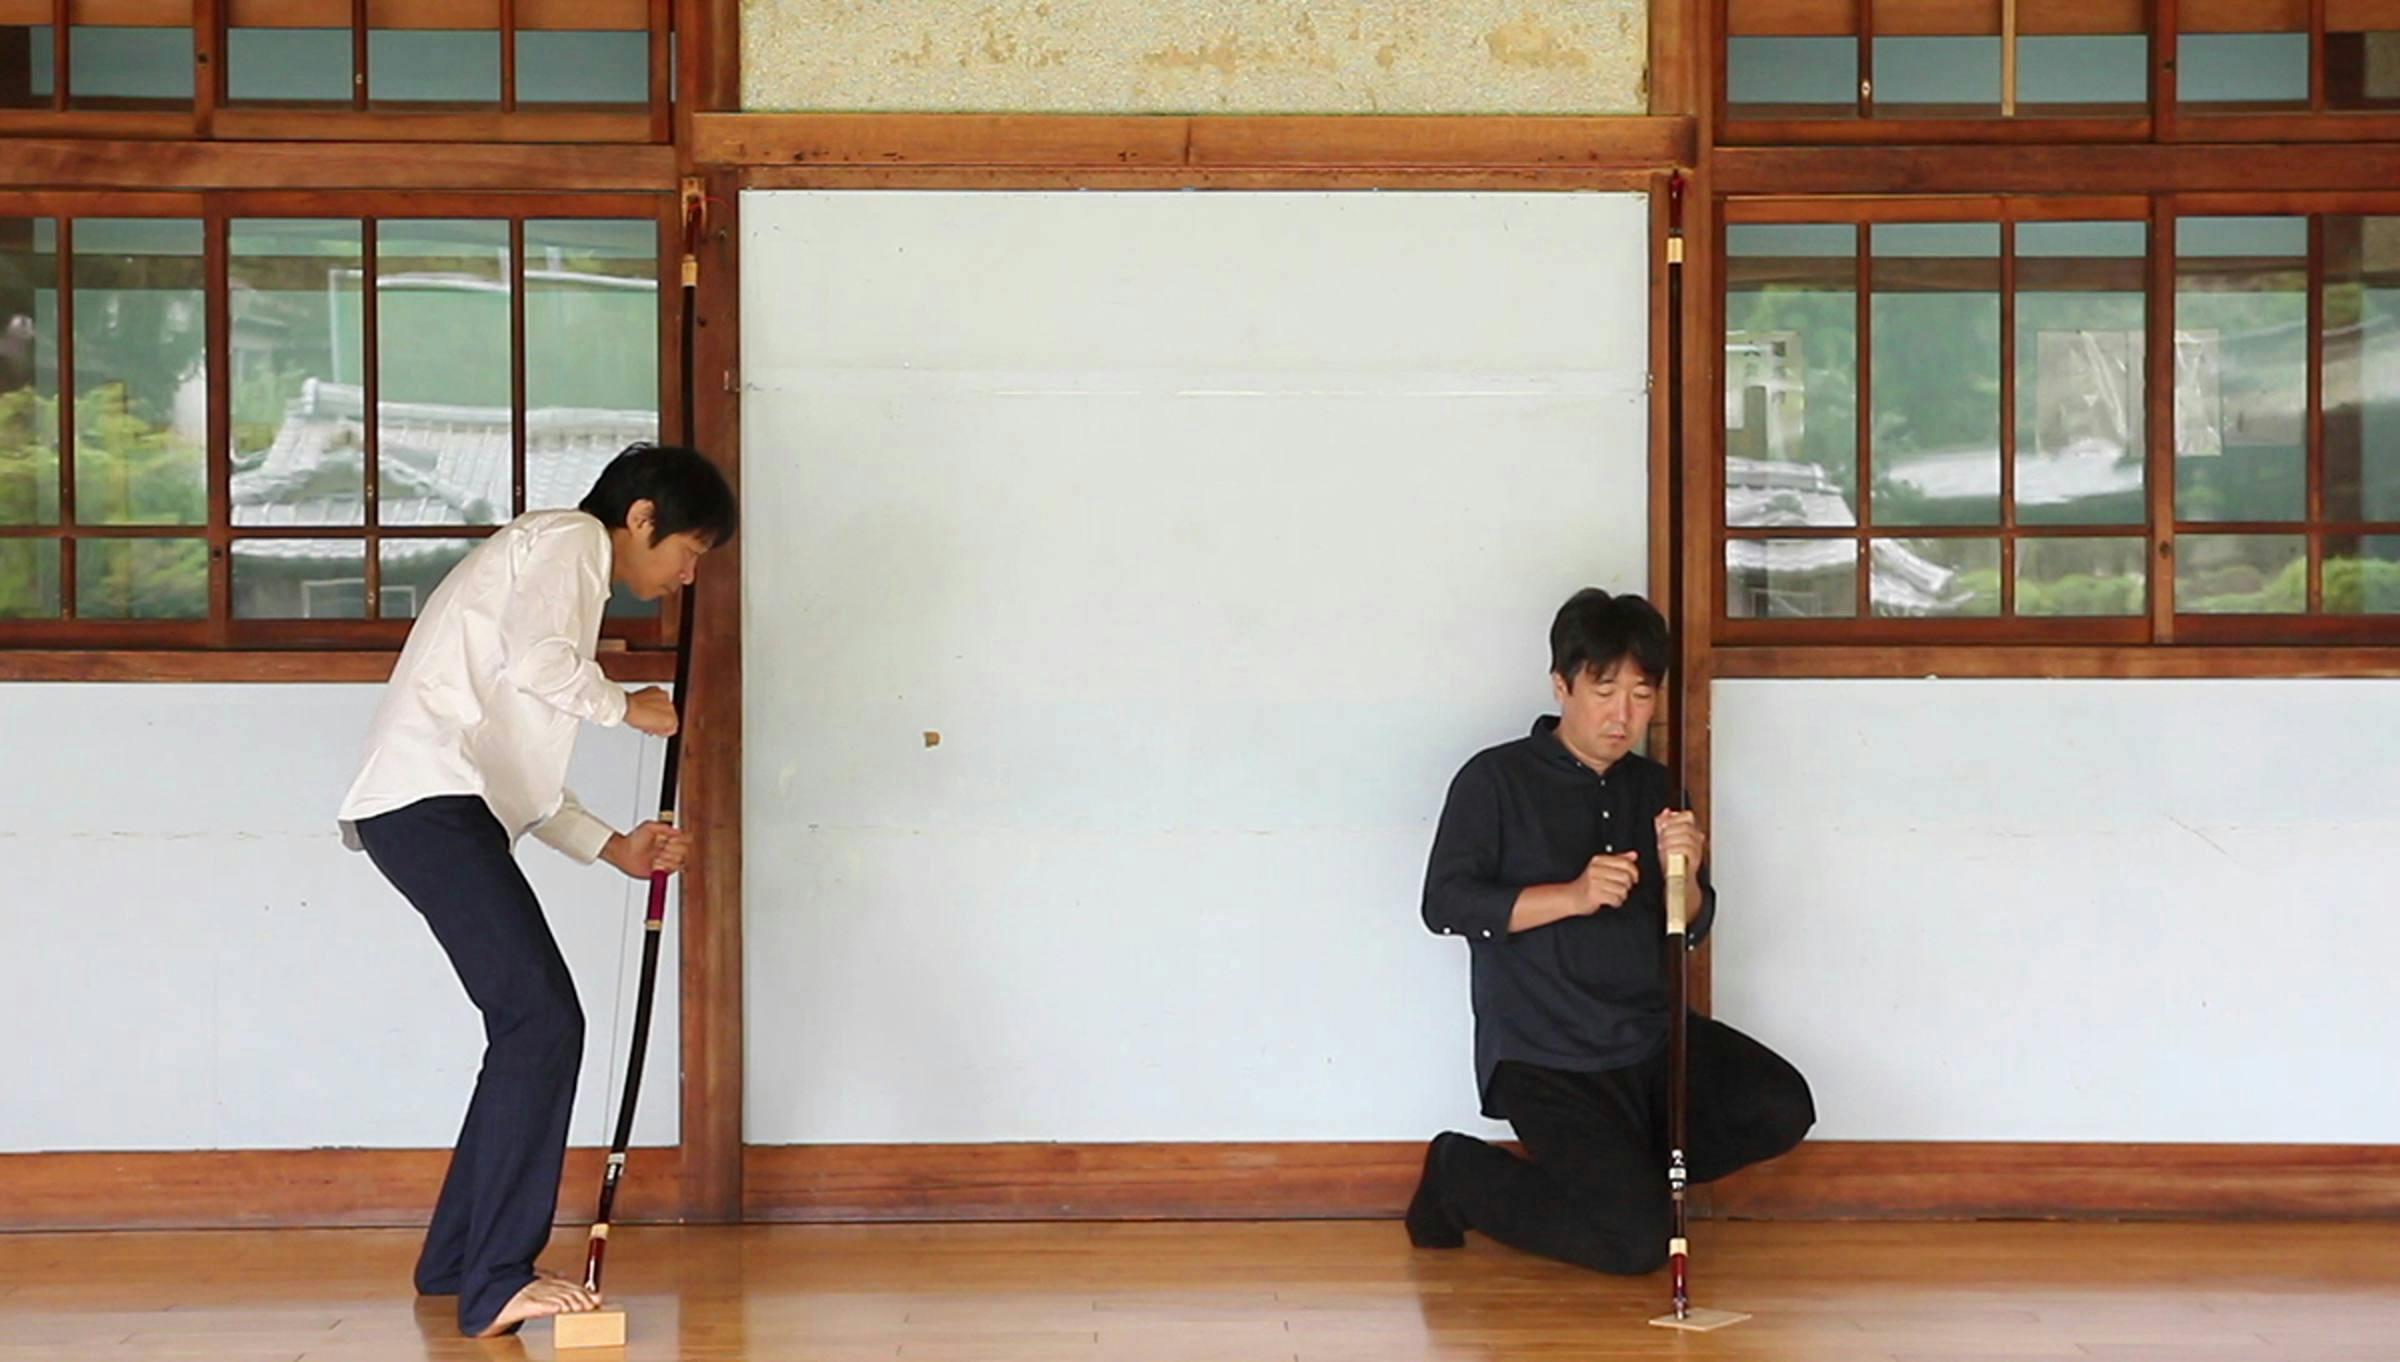 Two people are in a space with a wooden floor. Each person holds an archery bow upright with one end on the floor and they appear to play the bow like an instrument.